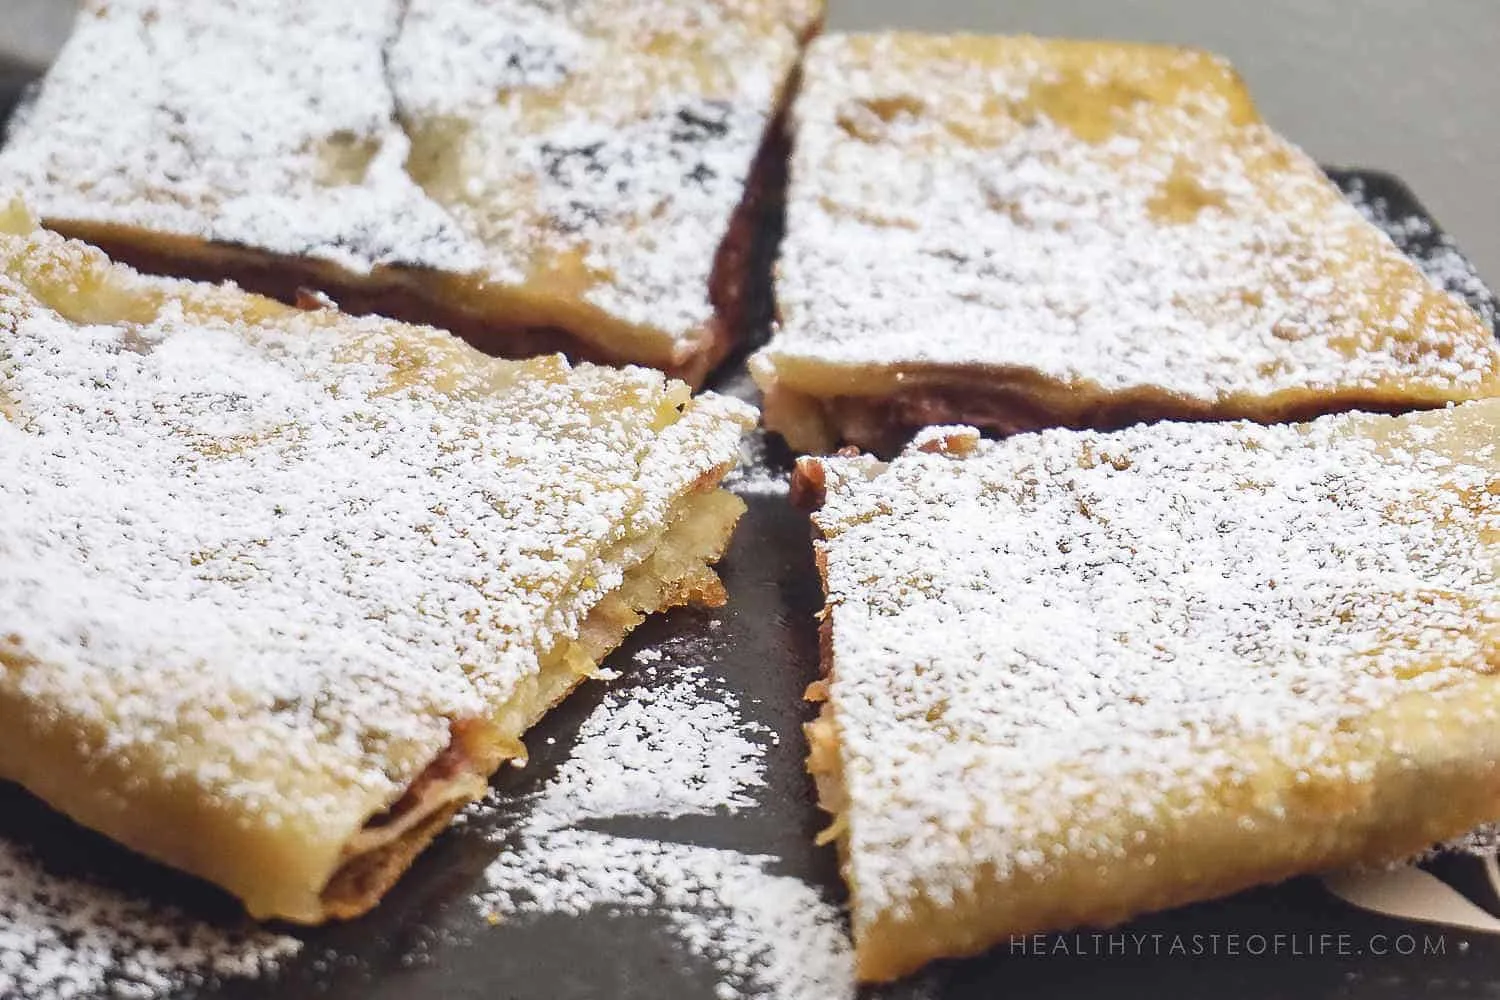 stuffed flatbread recipe with apples and sour cherries